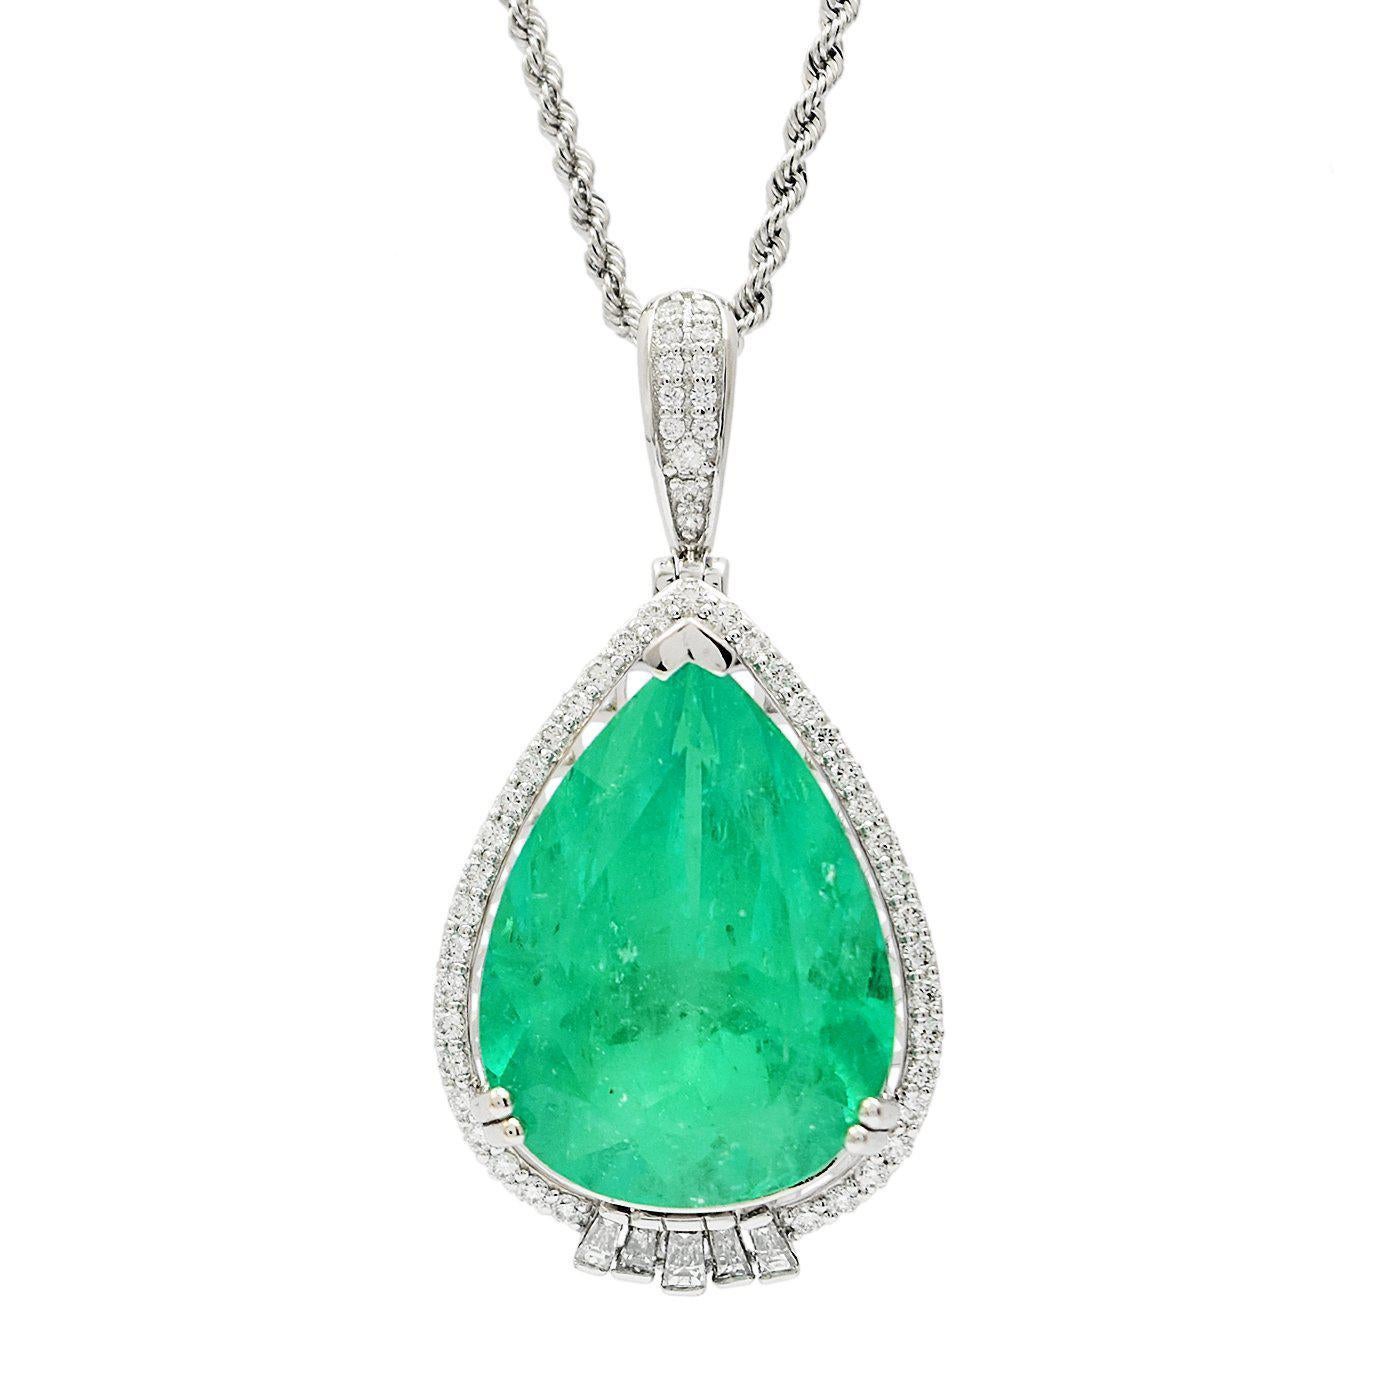 One electronically tested platinum ladies cast & assembled emerald and diamond pendant with chain. The pendant features an emerald set within an inner platinum basket and an outer stylized diamond bezel, completed by a hinged diamond set bail. The